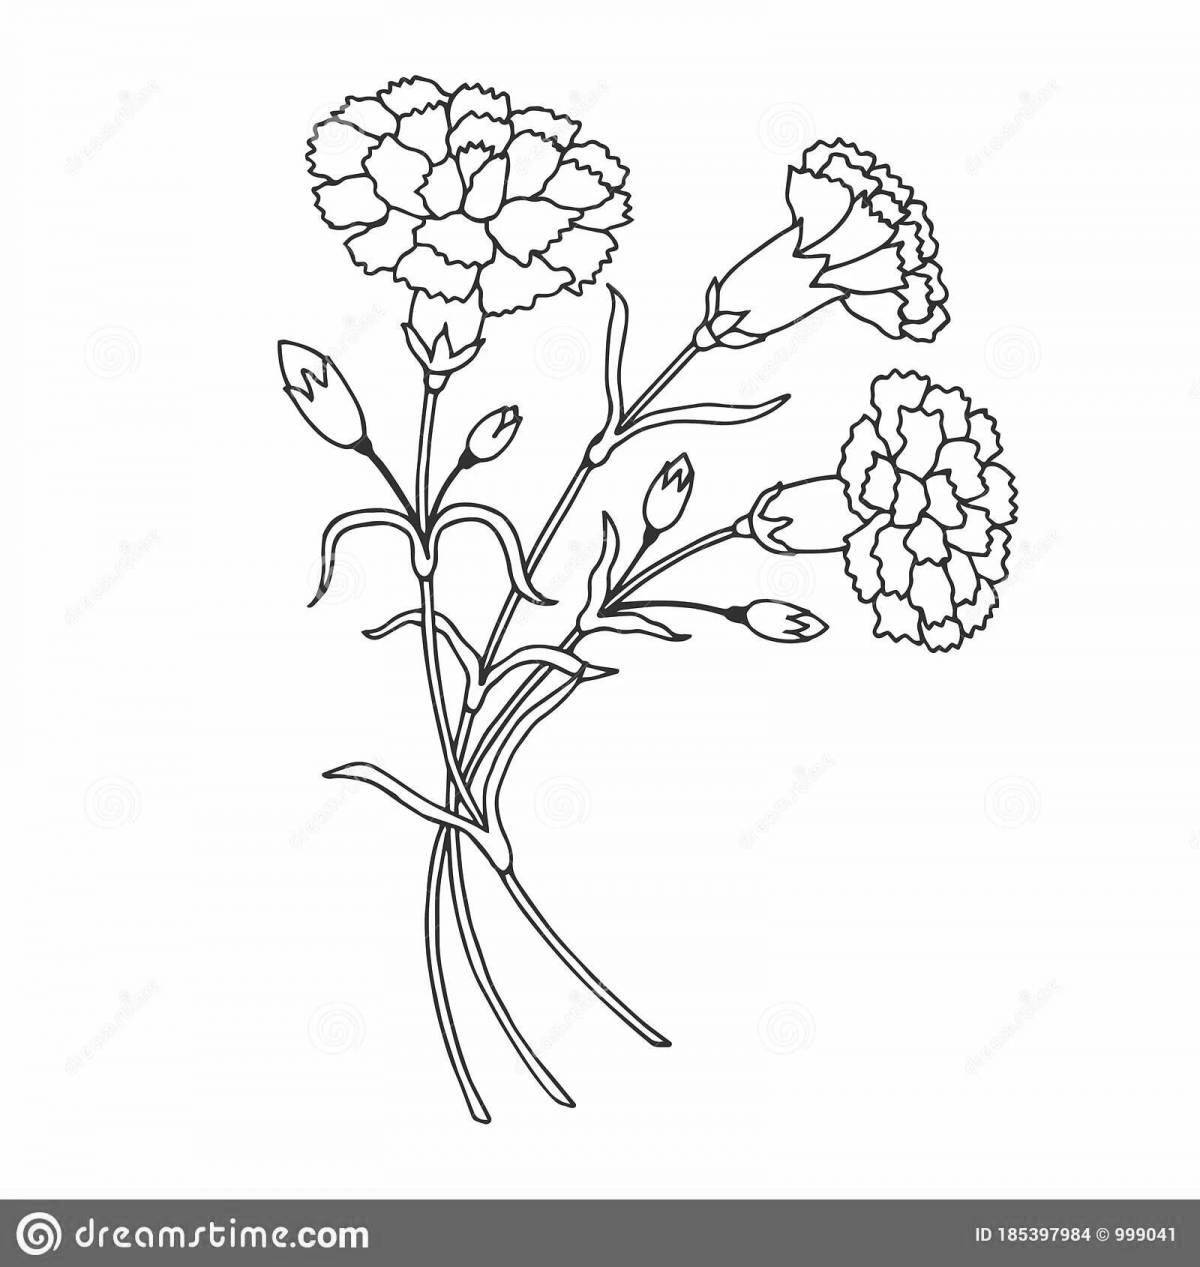 Coloring book shining bouquet of carnations